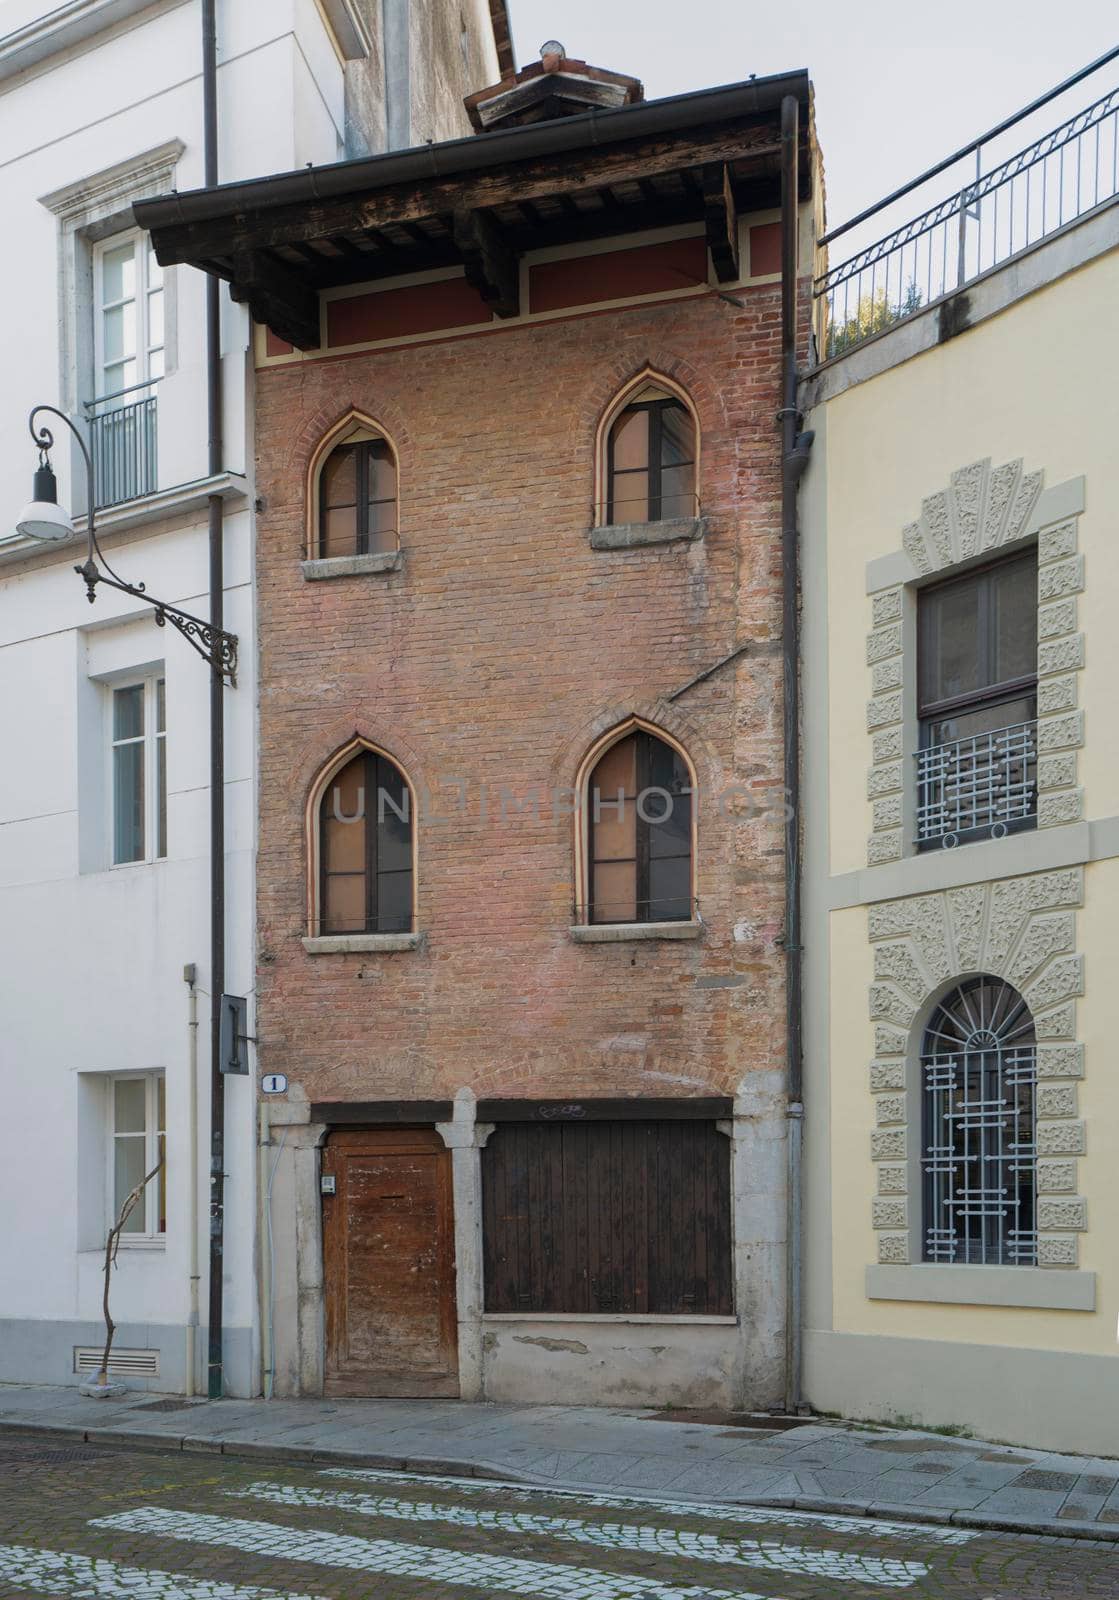 Udine, Italy. February 11, 2020.  view of the exterior of the oldest house in the city (built in 1300)